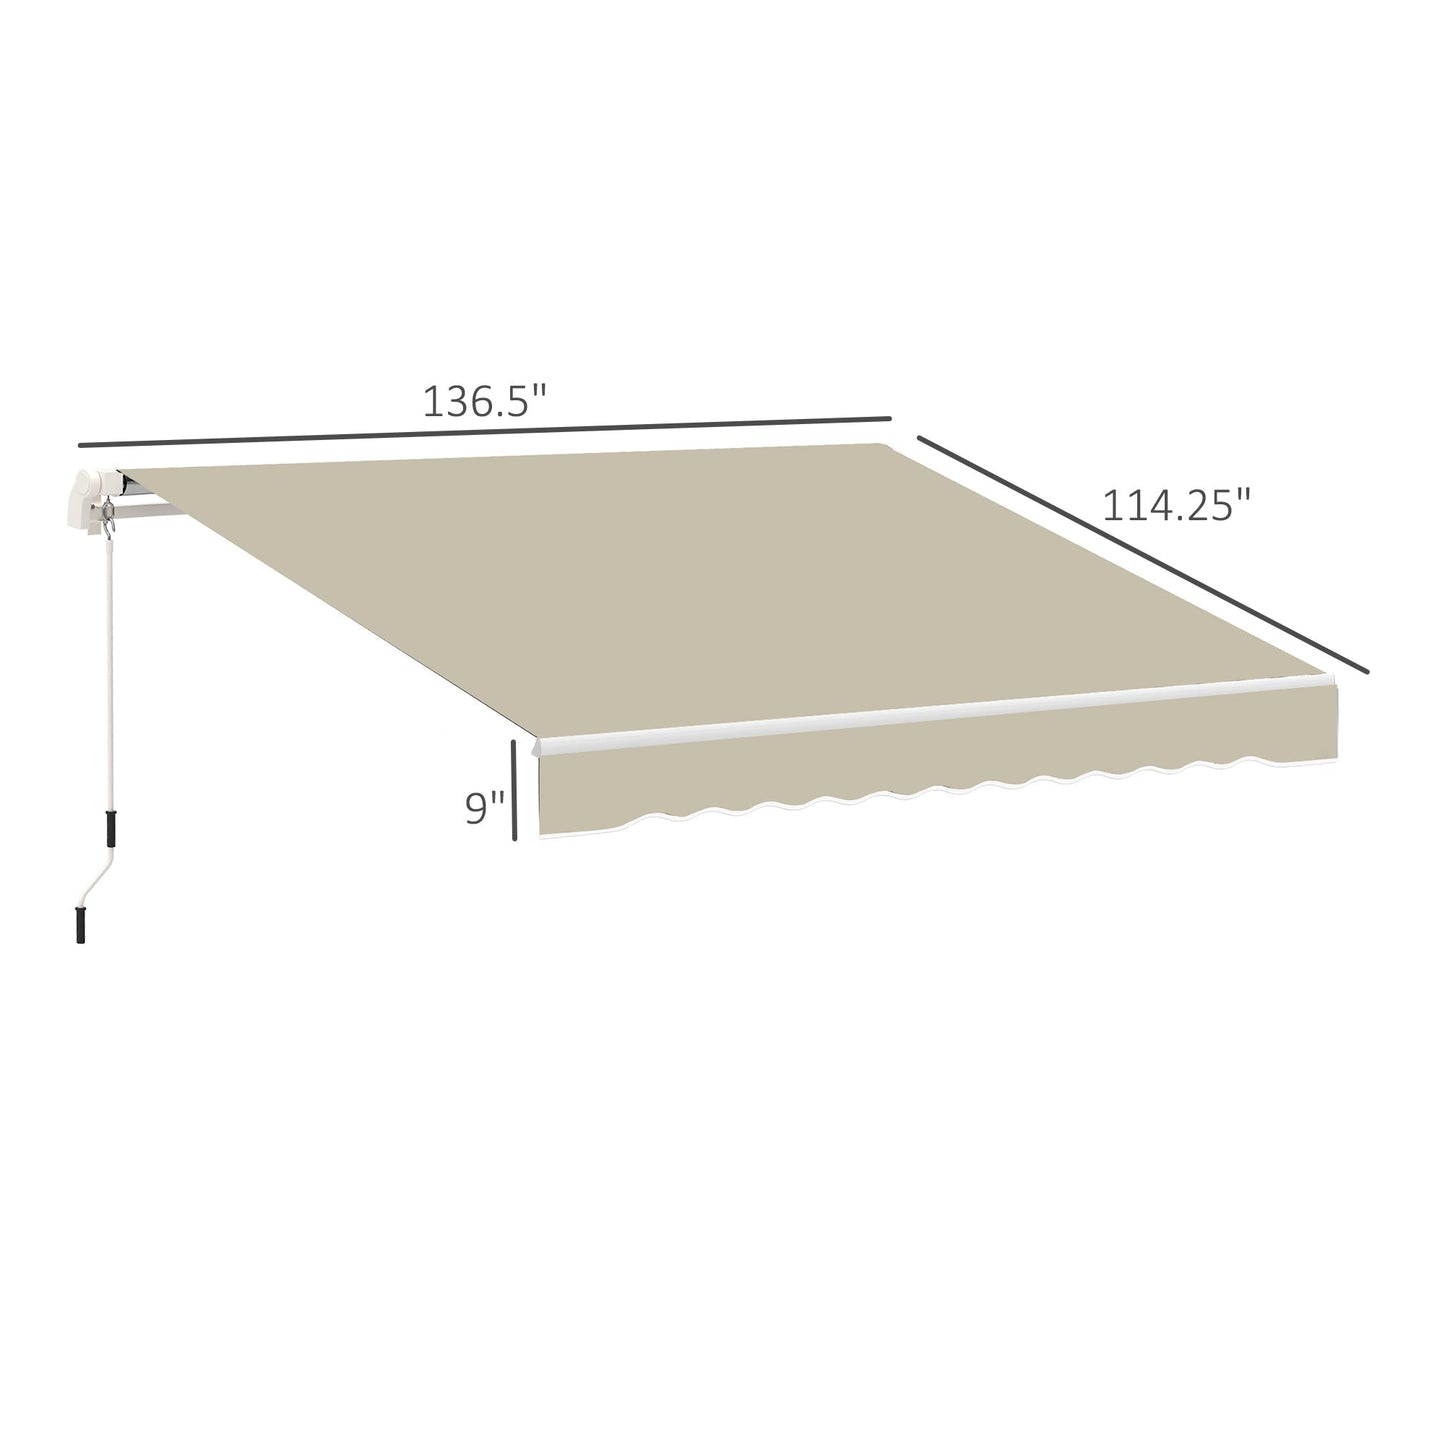 11' x 10' Retractable Awning Fabric Replacement Outdoor Sunshade Canopy Awning Cover, UV Protection, Cream White at Gallery Canada